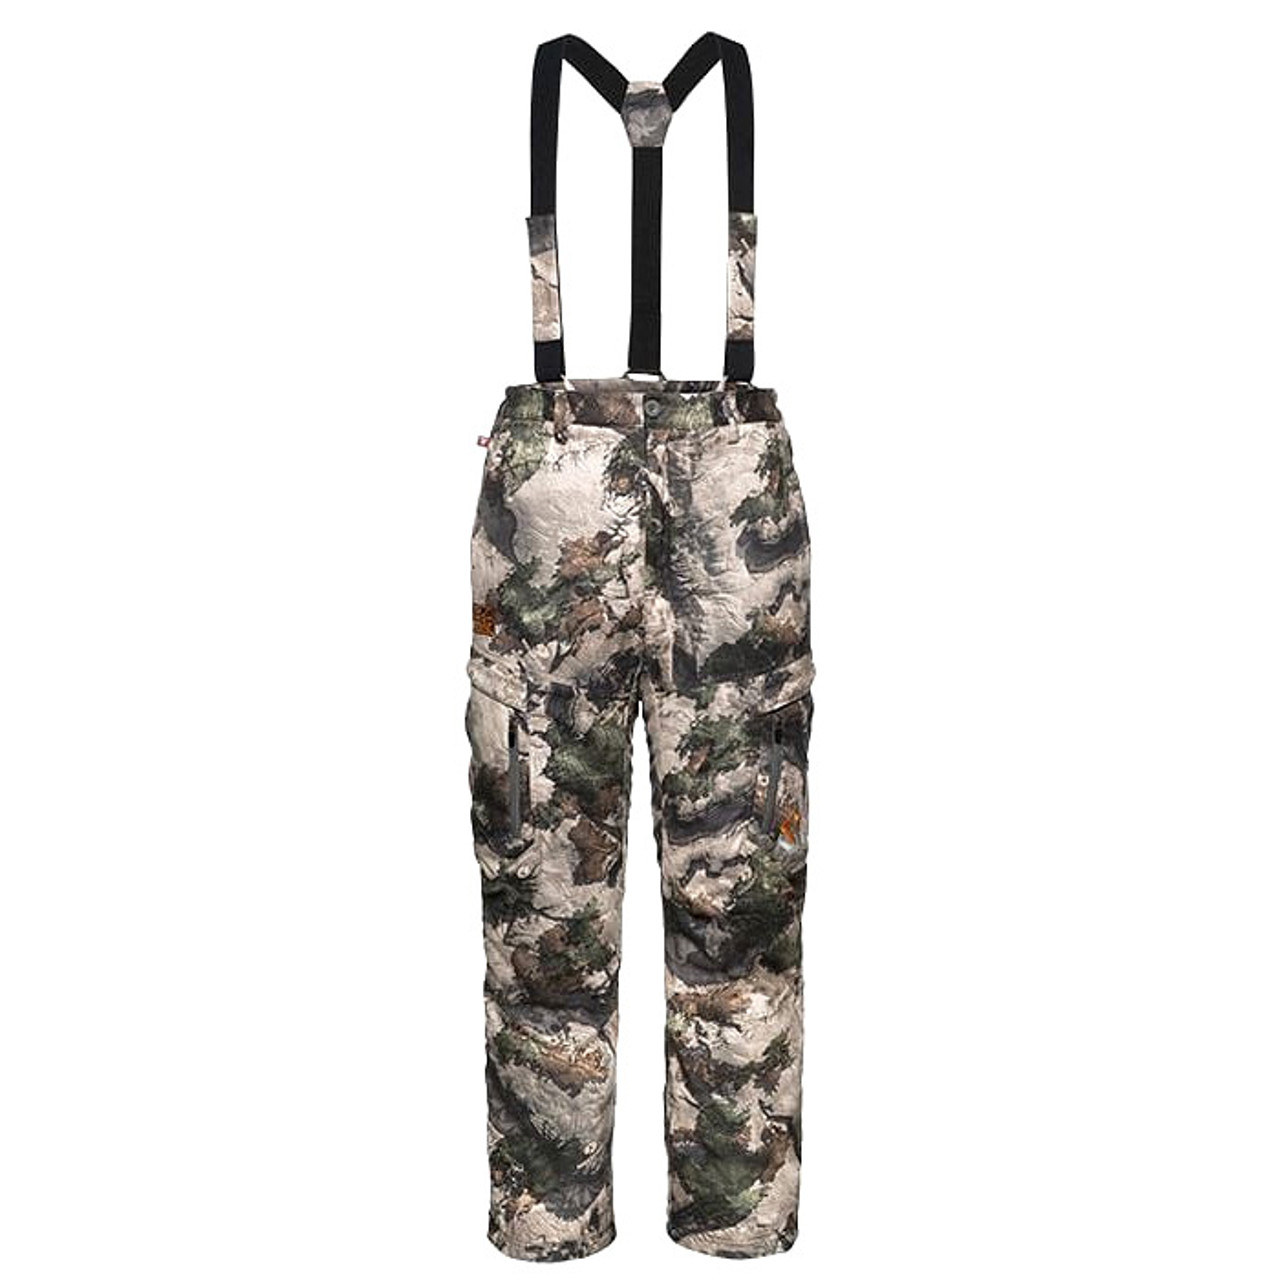 BE:1 Divergent Pant MO Terra Gila Camo by Scentlok